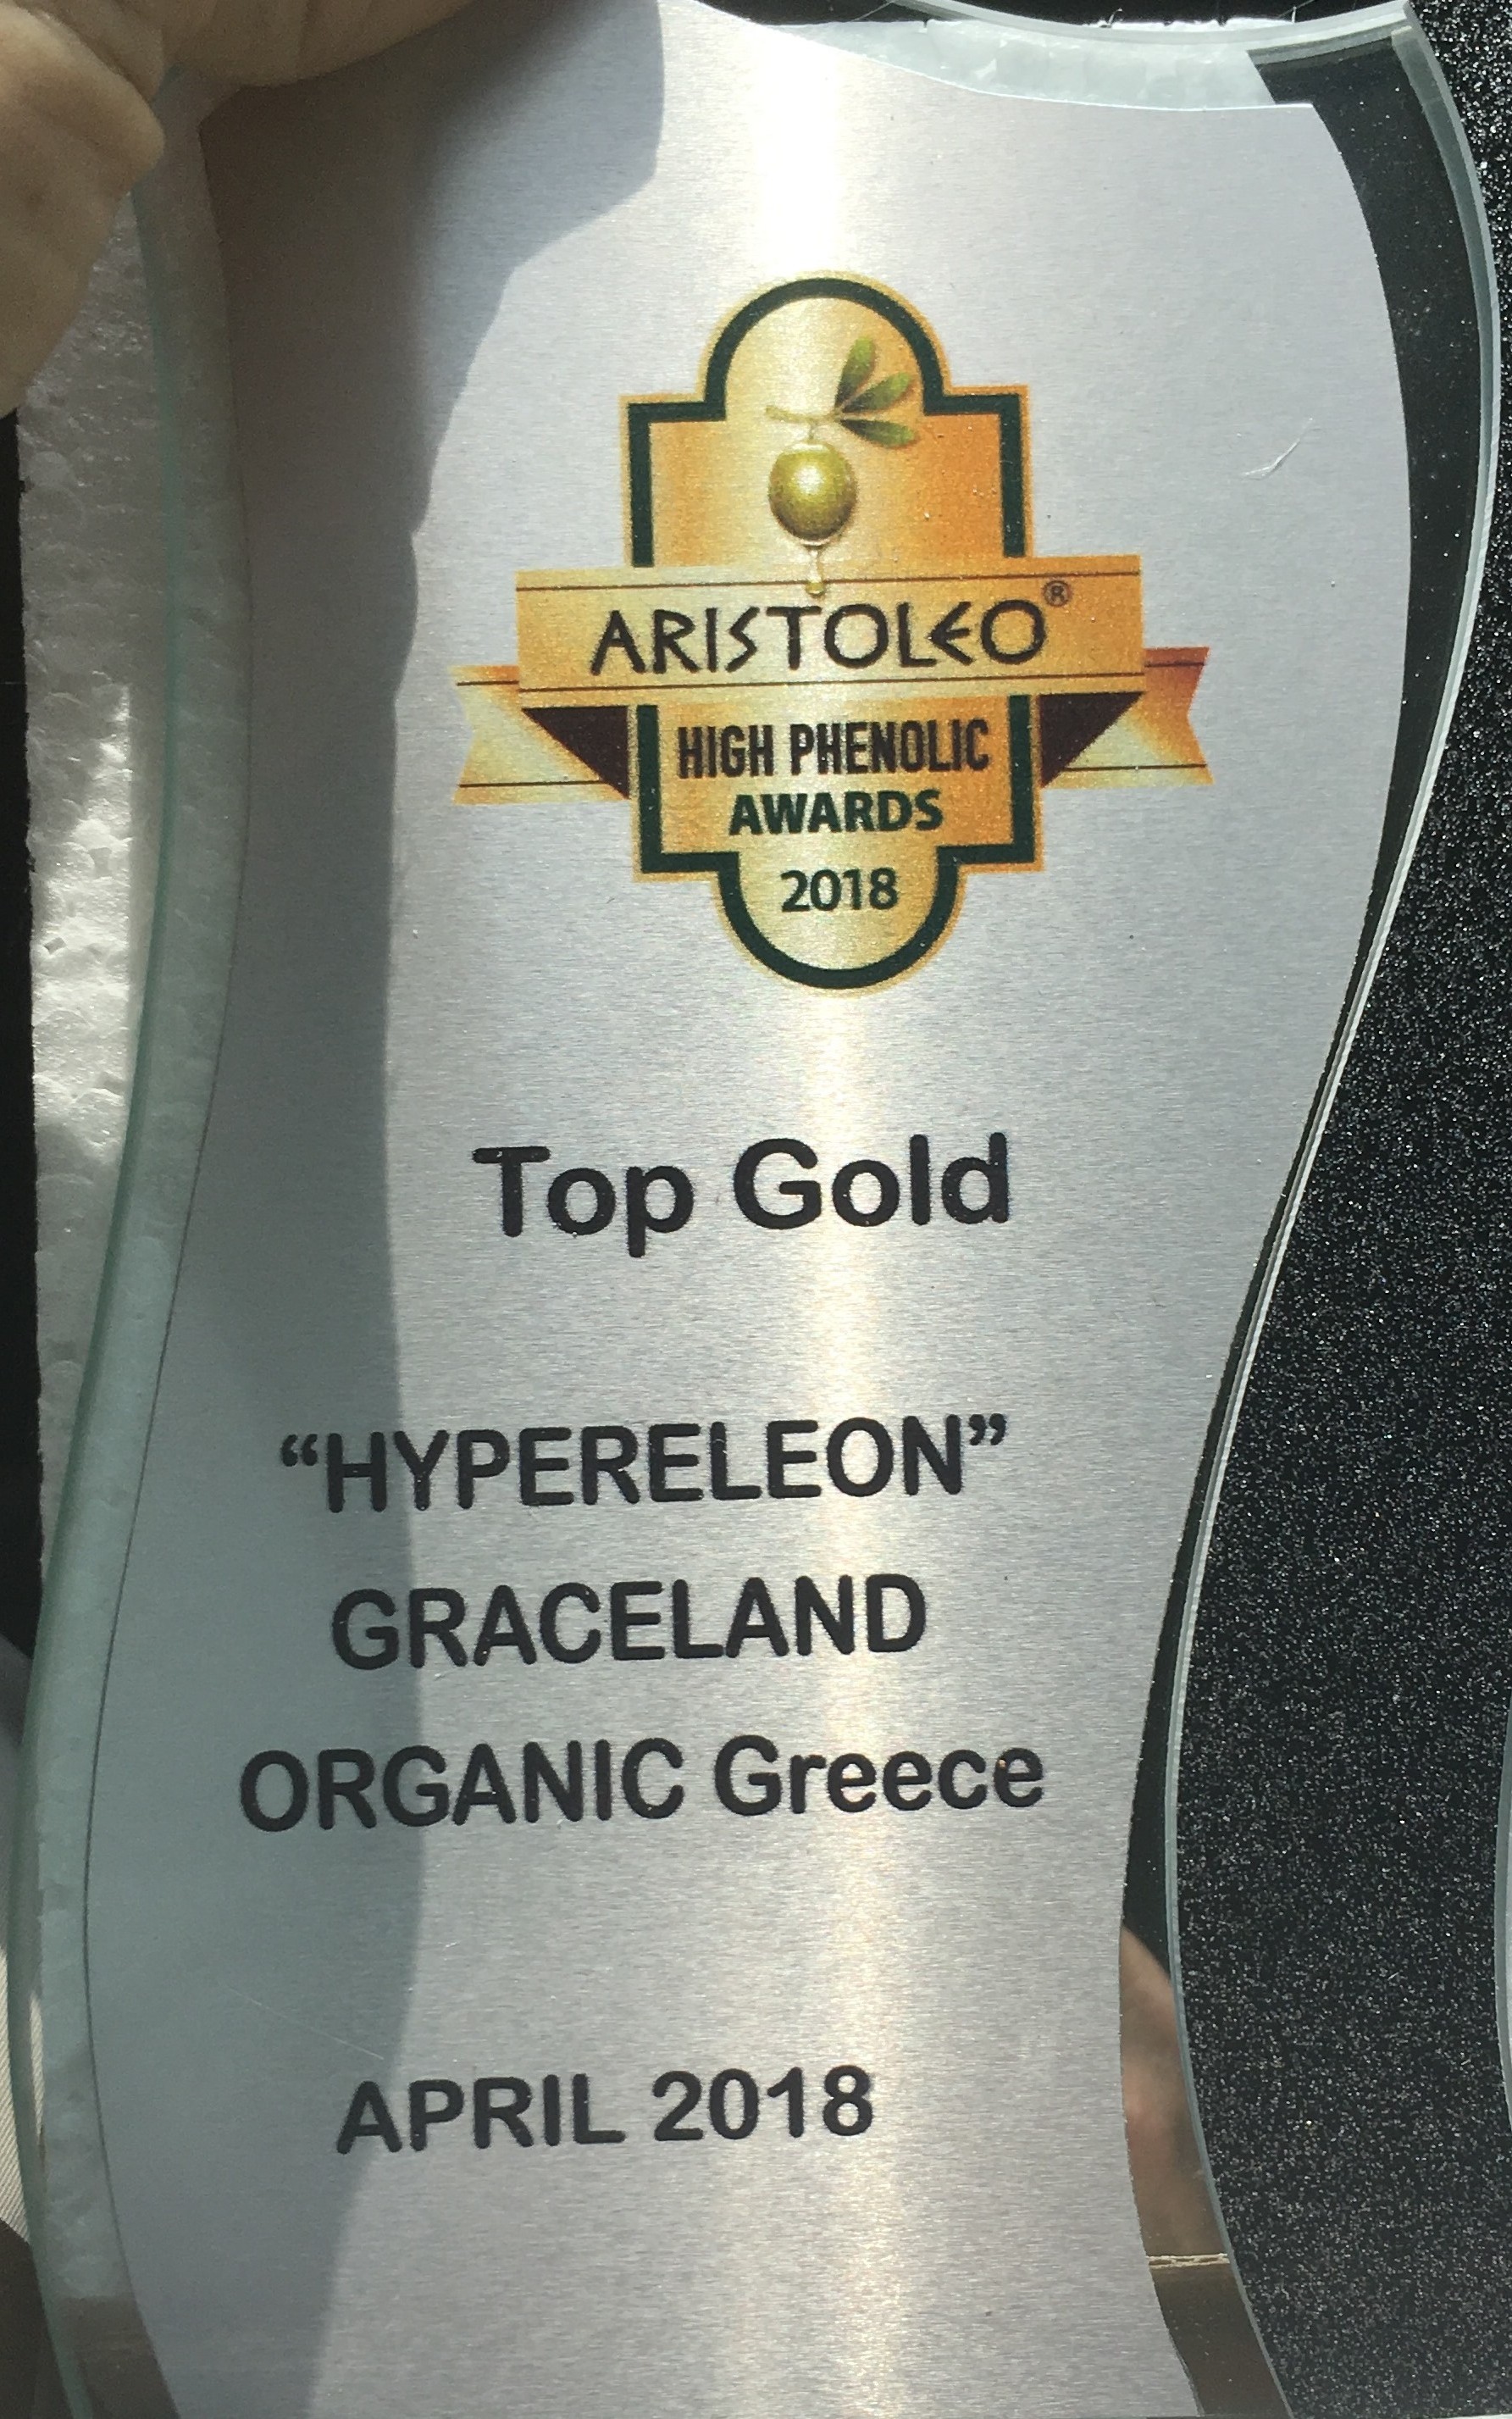 TOP GOLD ARISTOLEO HIGH PHENOLIC AWARD 2018 for Extremely High Phenolic Content & Great Taste for the GRACELAND TEAM (G-TEAM) , regarding the 